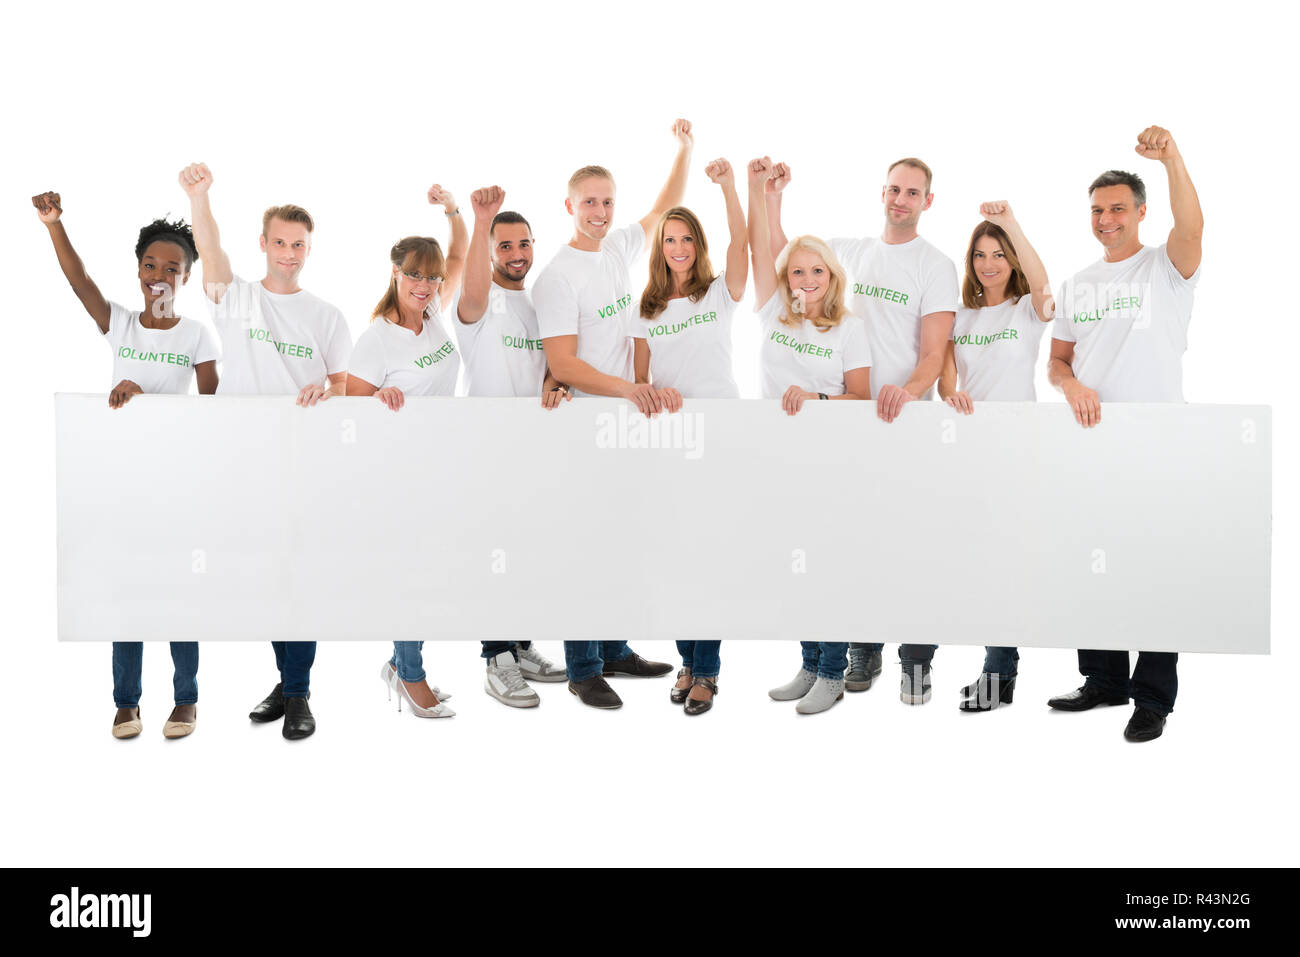 Confident Volunteers With Arms Raised Holding Blank Billboard Stock Photo